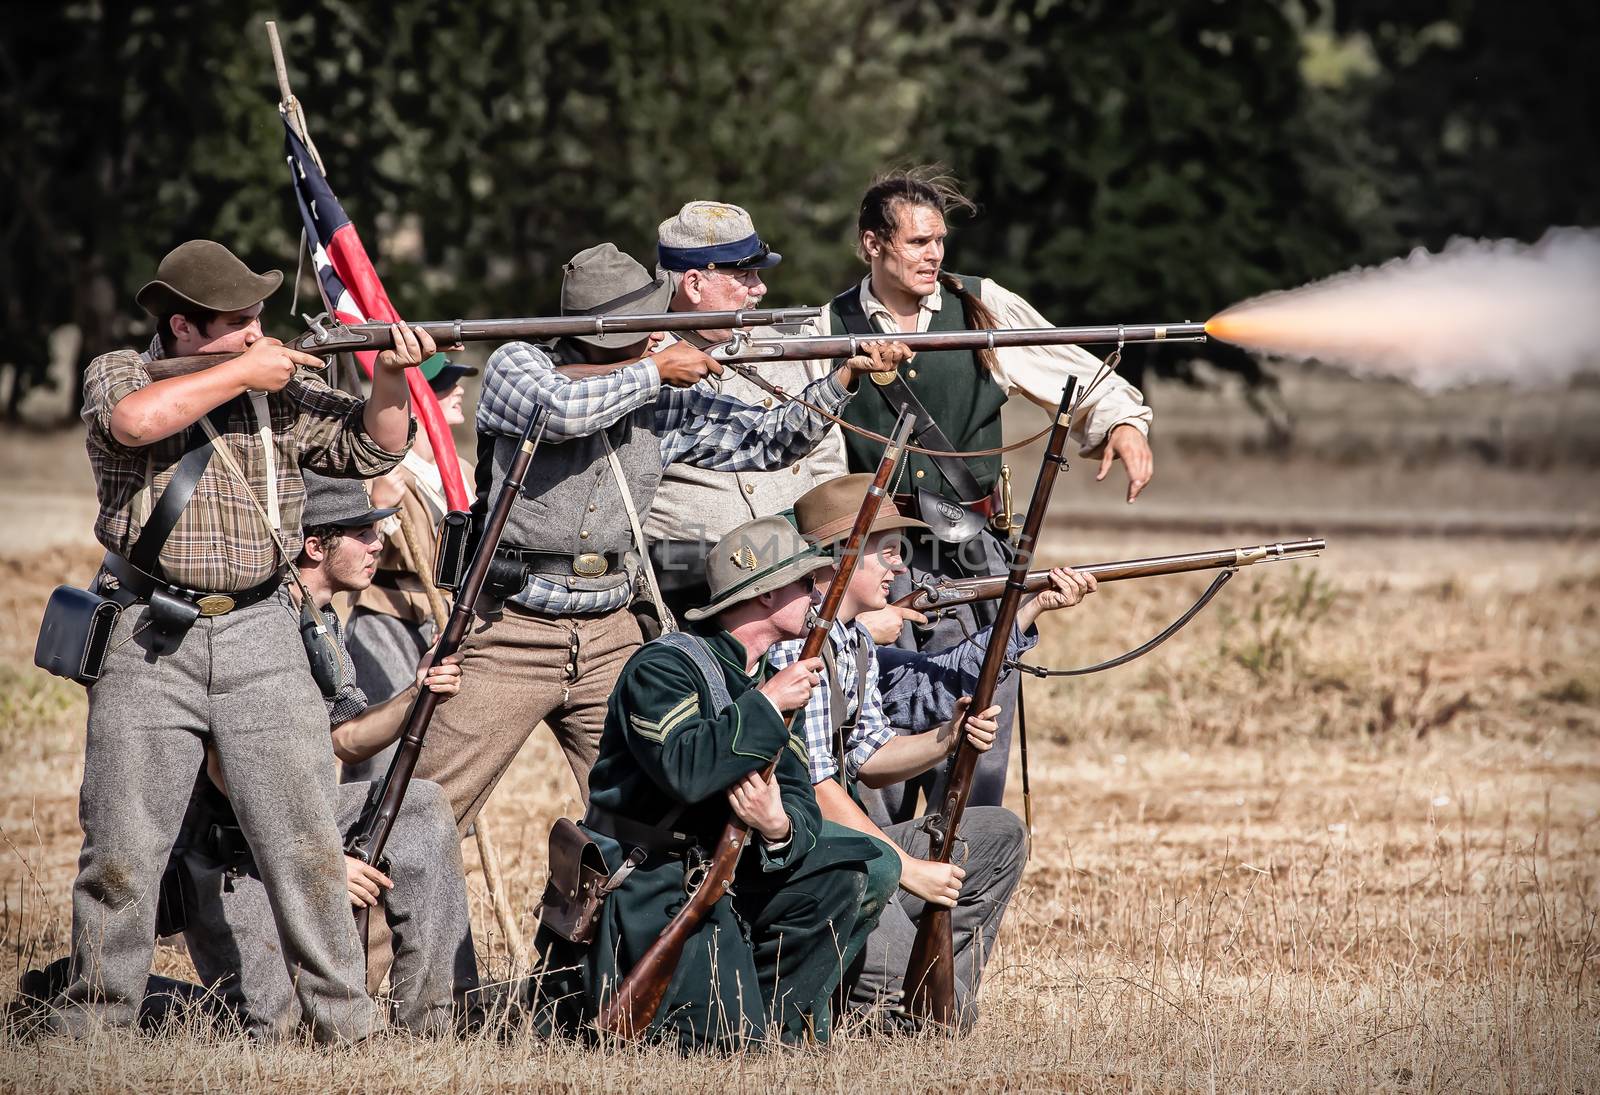 Confederate troops open fire on the Union Army during a Civil War reenactment in Anderson, California.
Photo taken on: September 27th, 2014